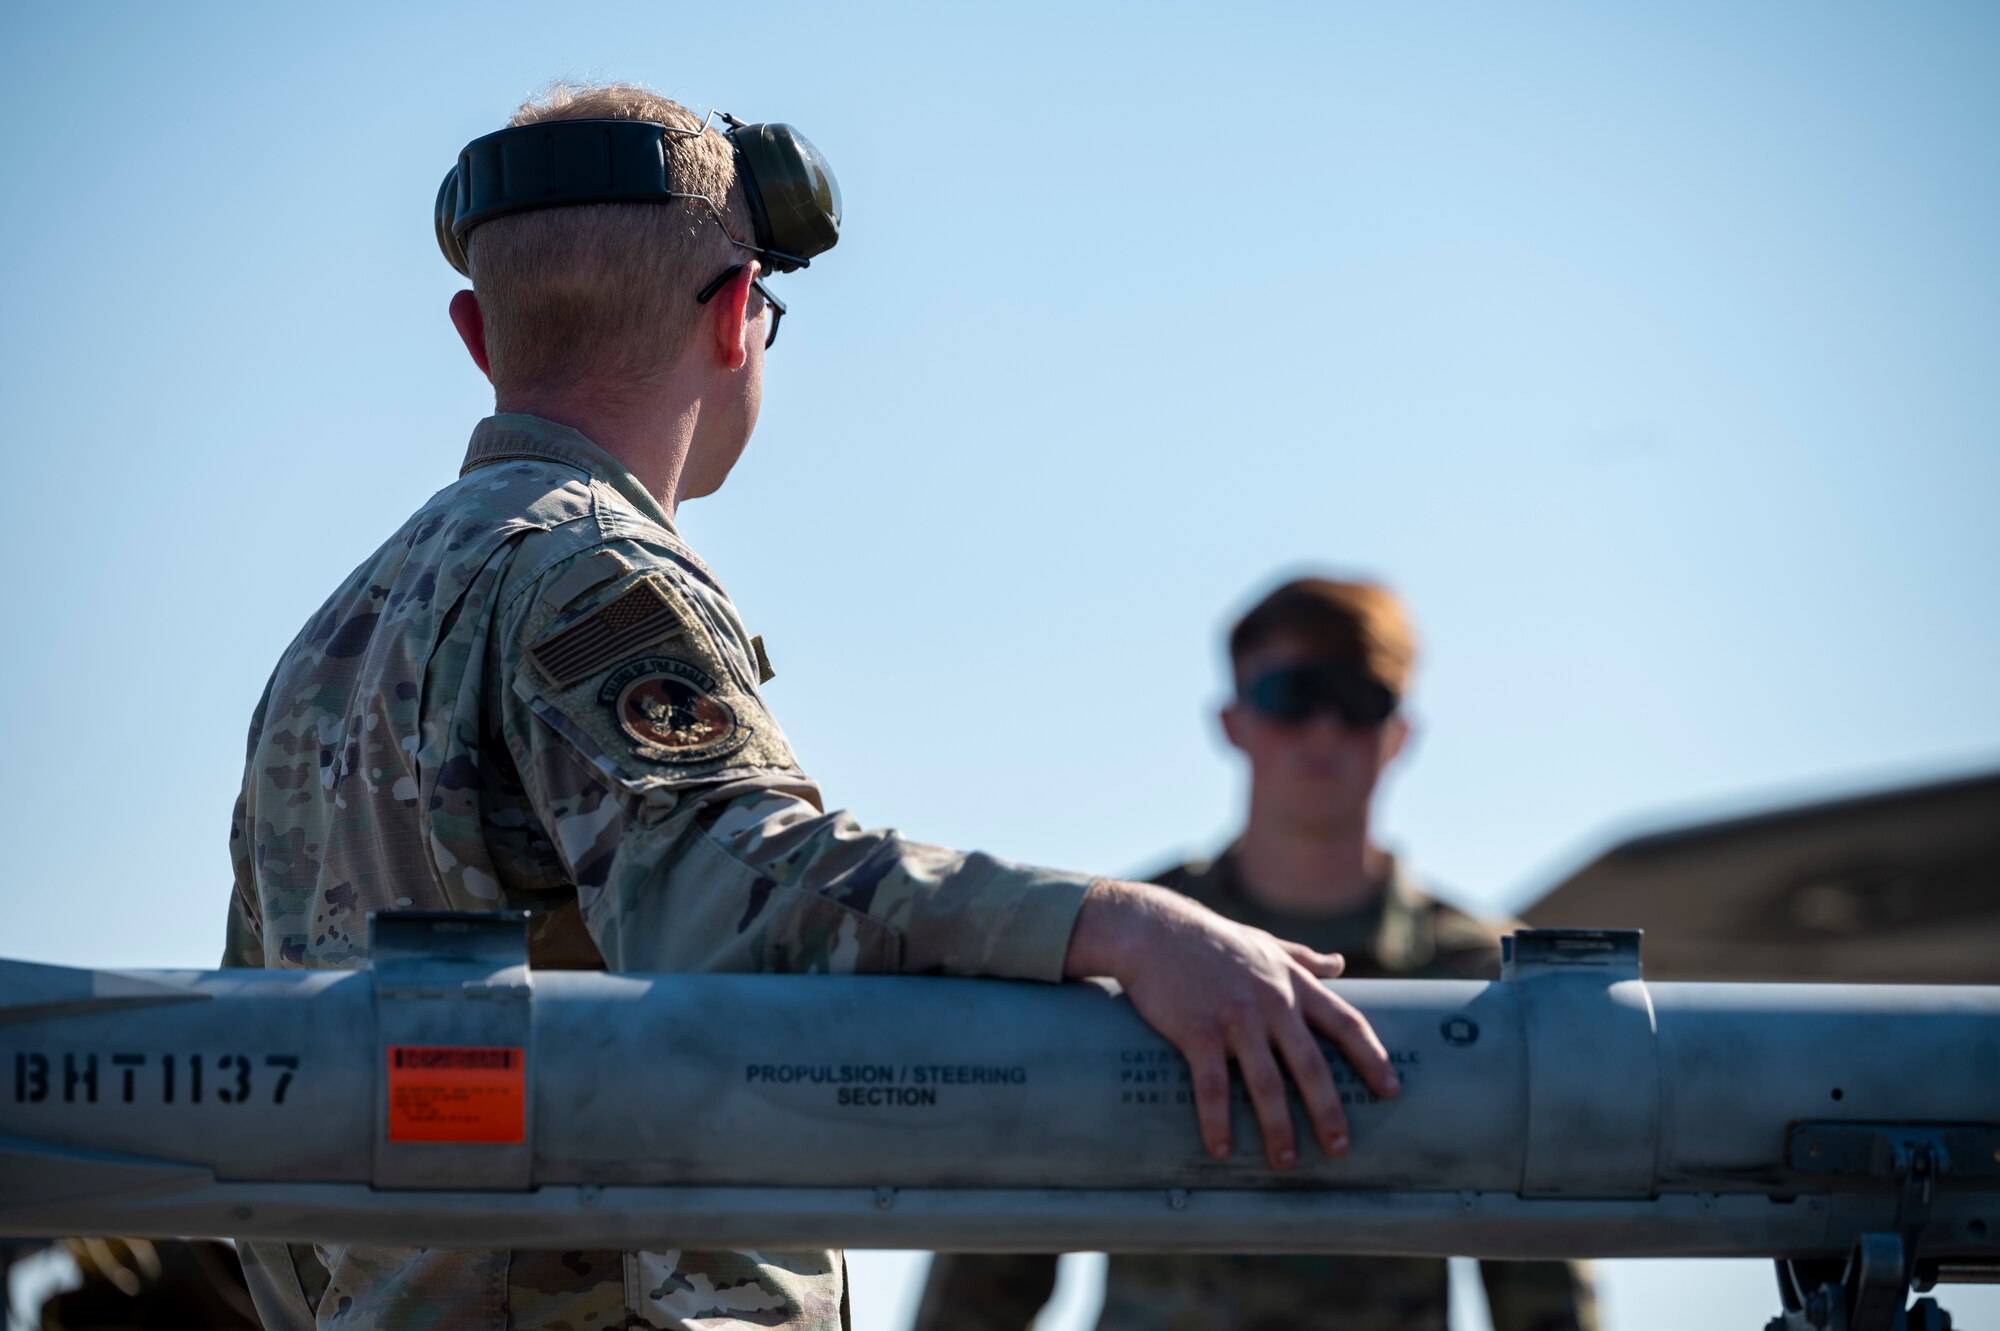 Airman secures a missile to a cart